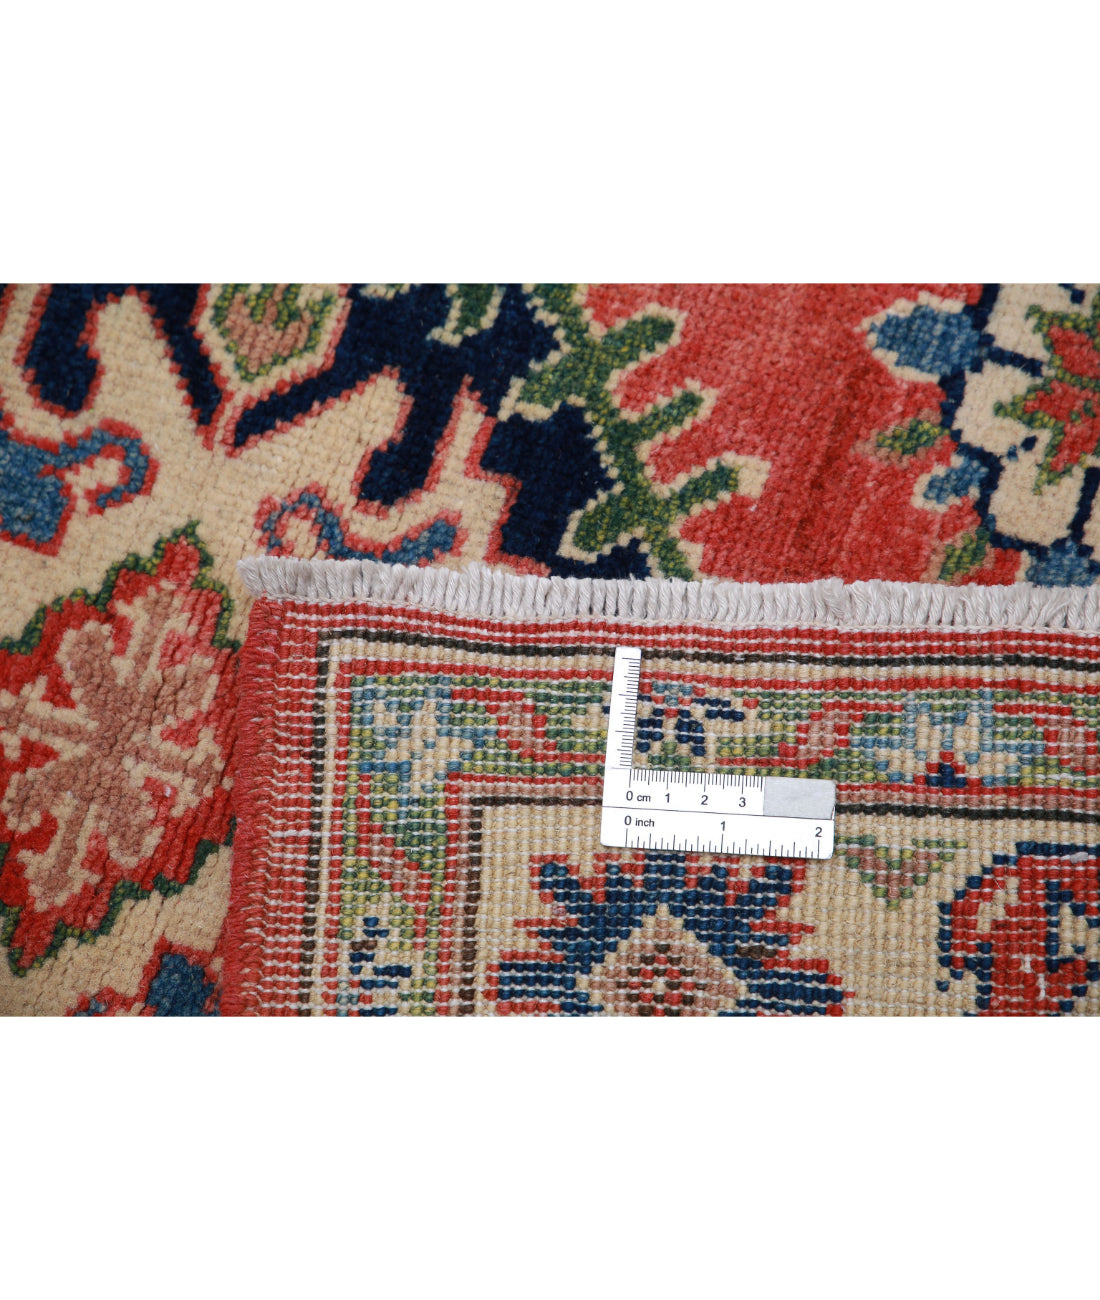 Hand Knotted Tribal Kazak Wool Rug - 3'1'' x 4'9'' 3'1'' x 4'9'' (93 X 143) / Red / Ivory